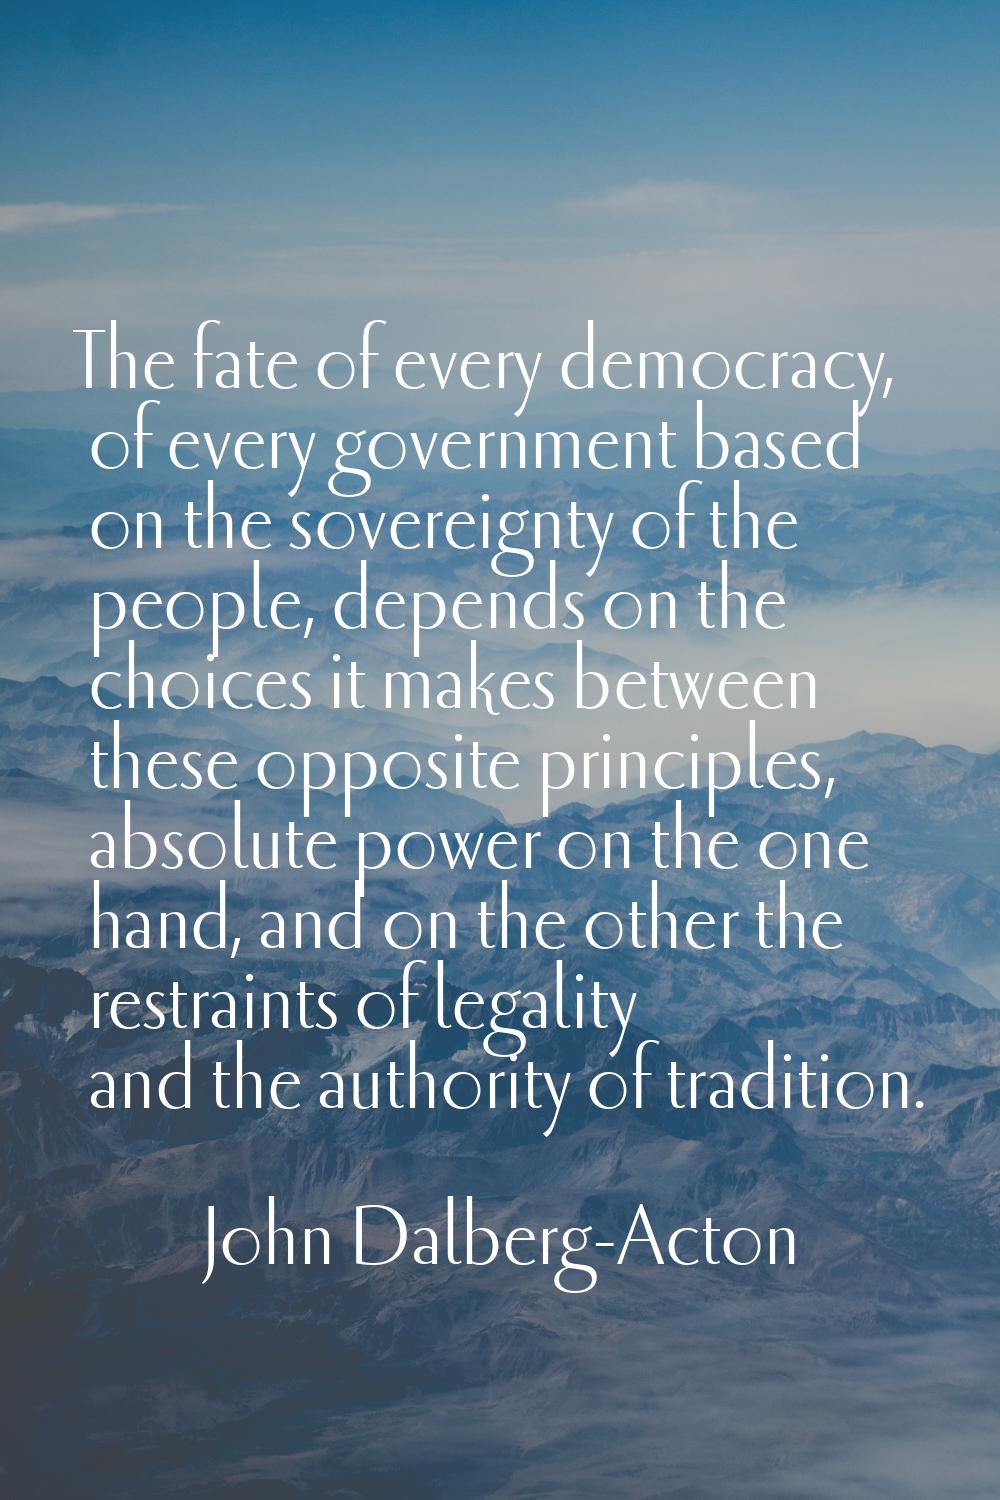 The fate of every democracy, of every government based on the sovereignty of the people, depends on